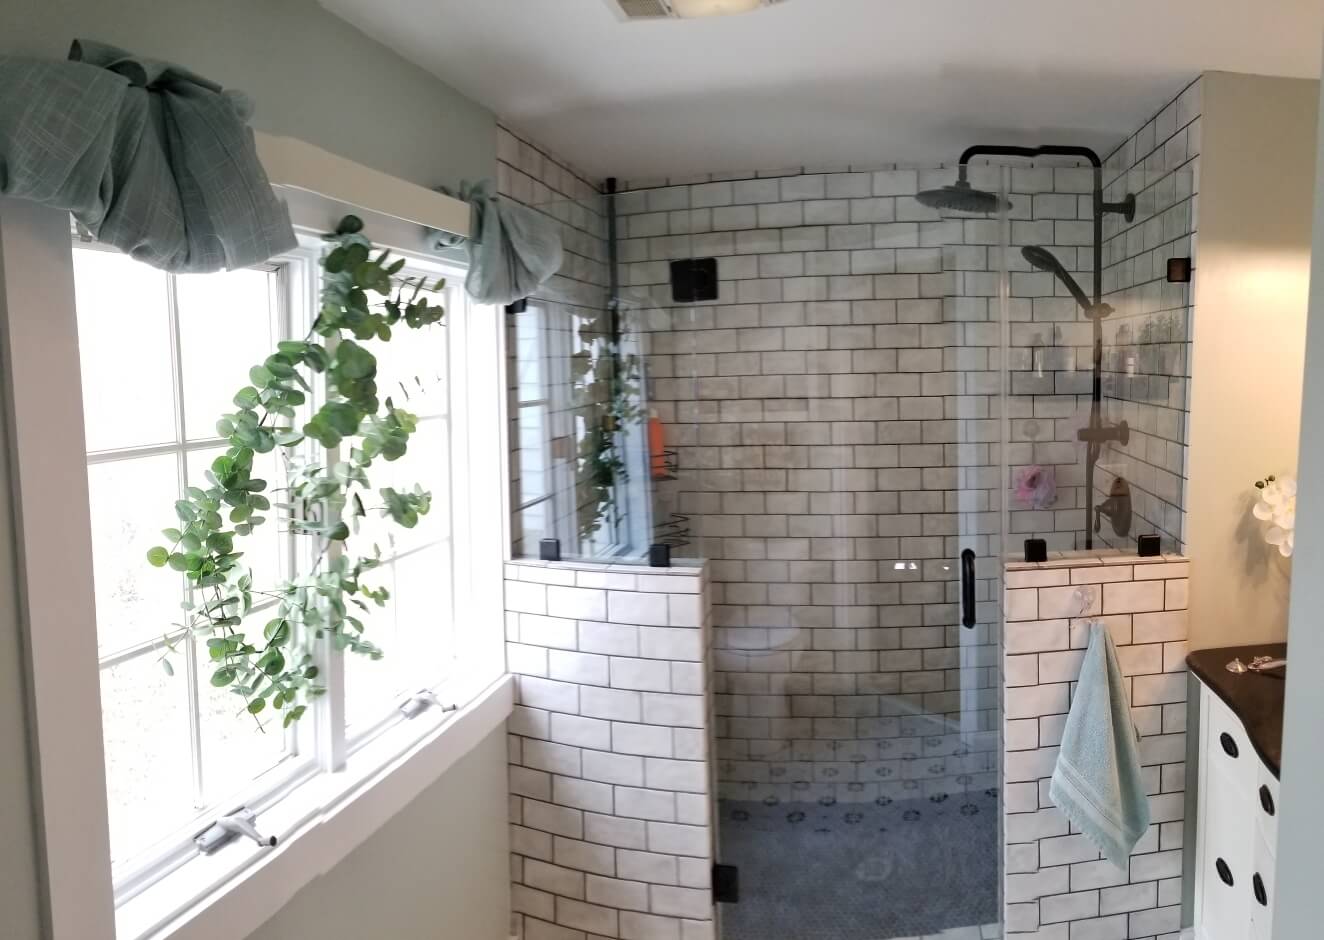 Shower enclosure example from February 2020